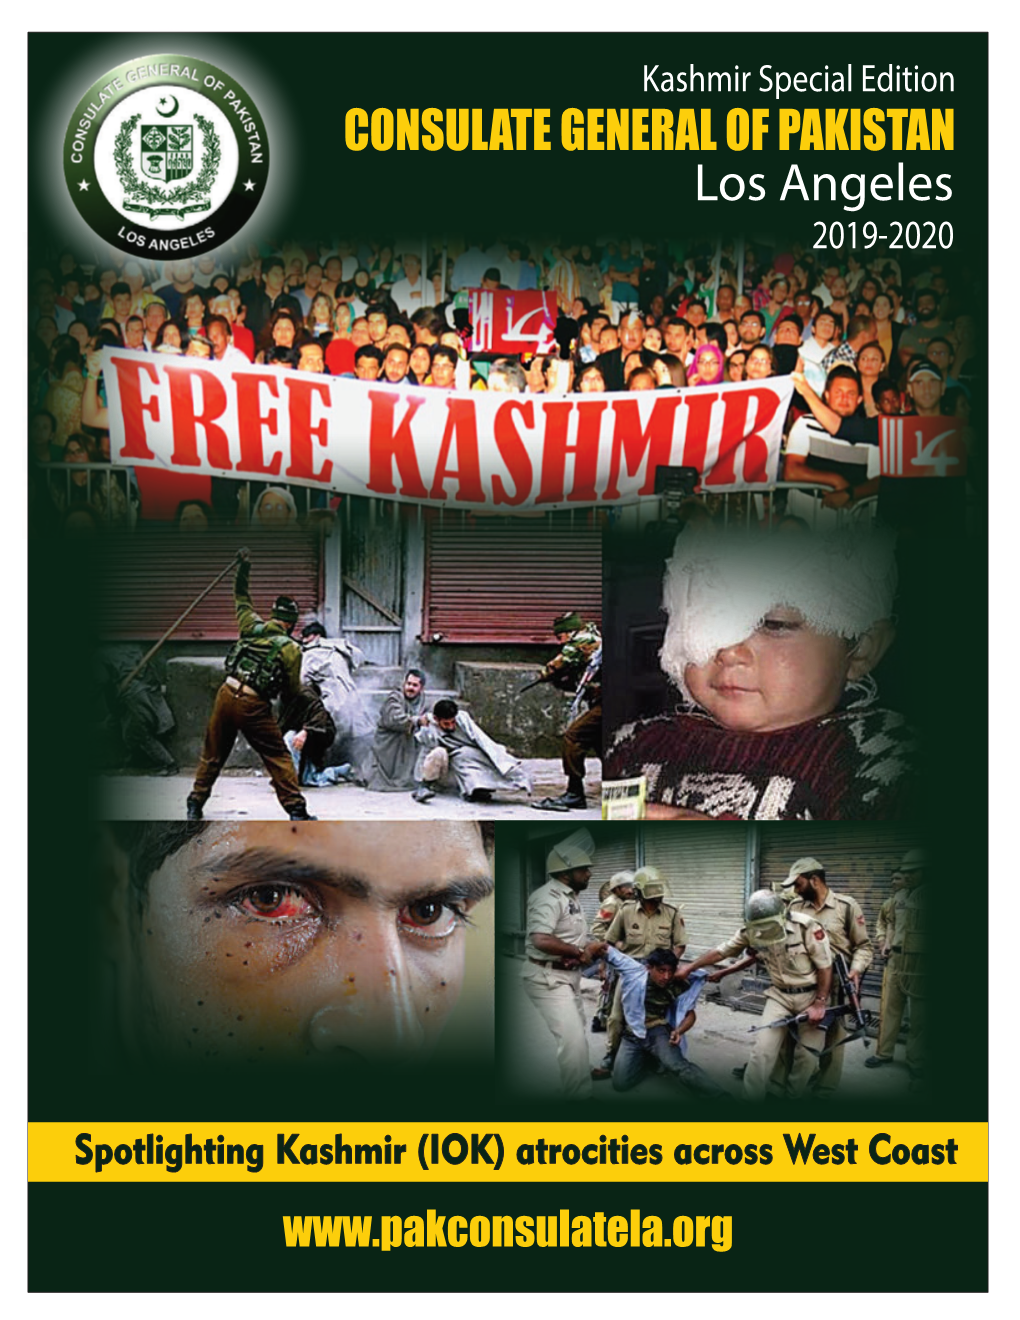 Consulate General of Pakistan Los Angeles Kashmir Special Edition